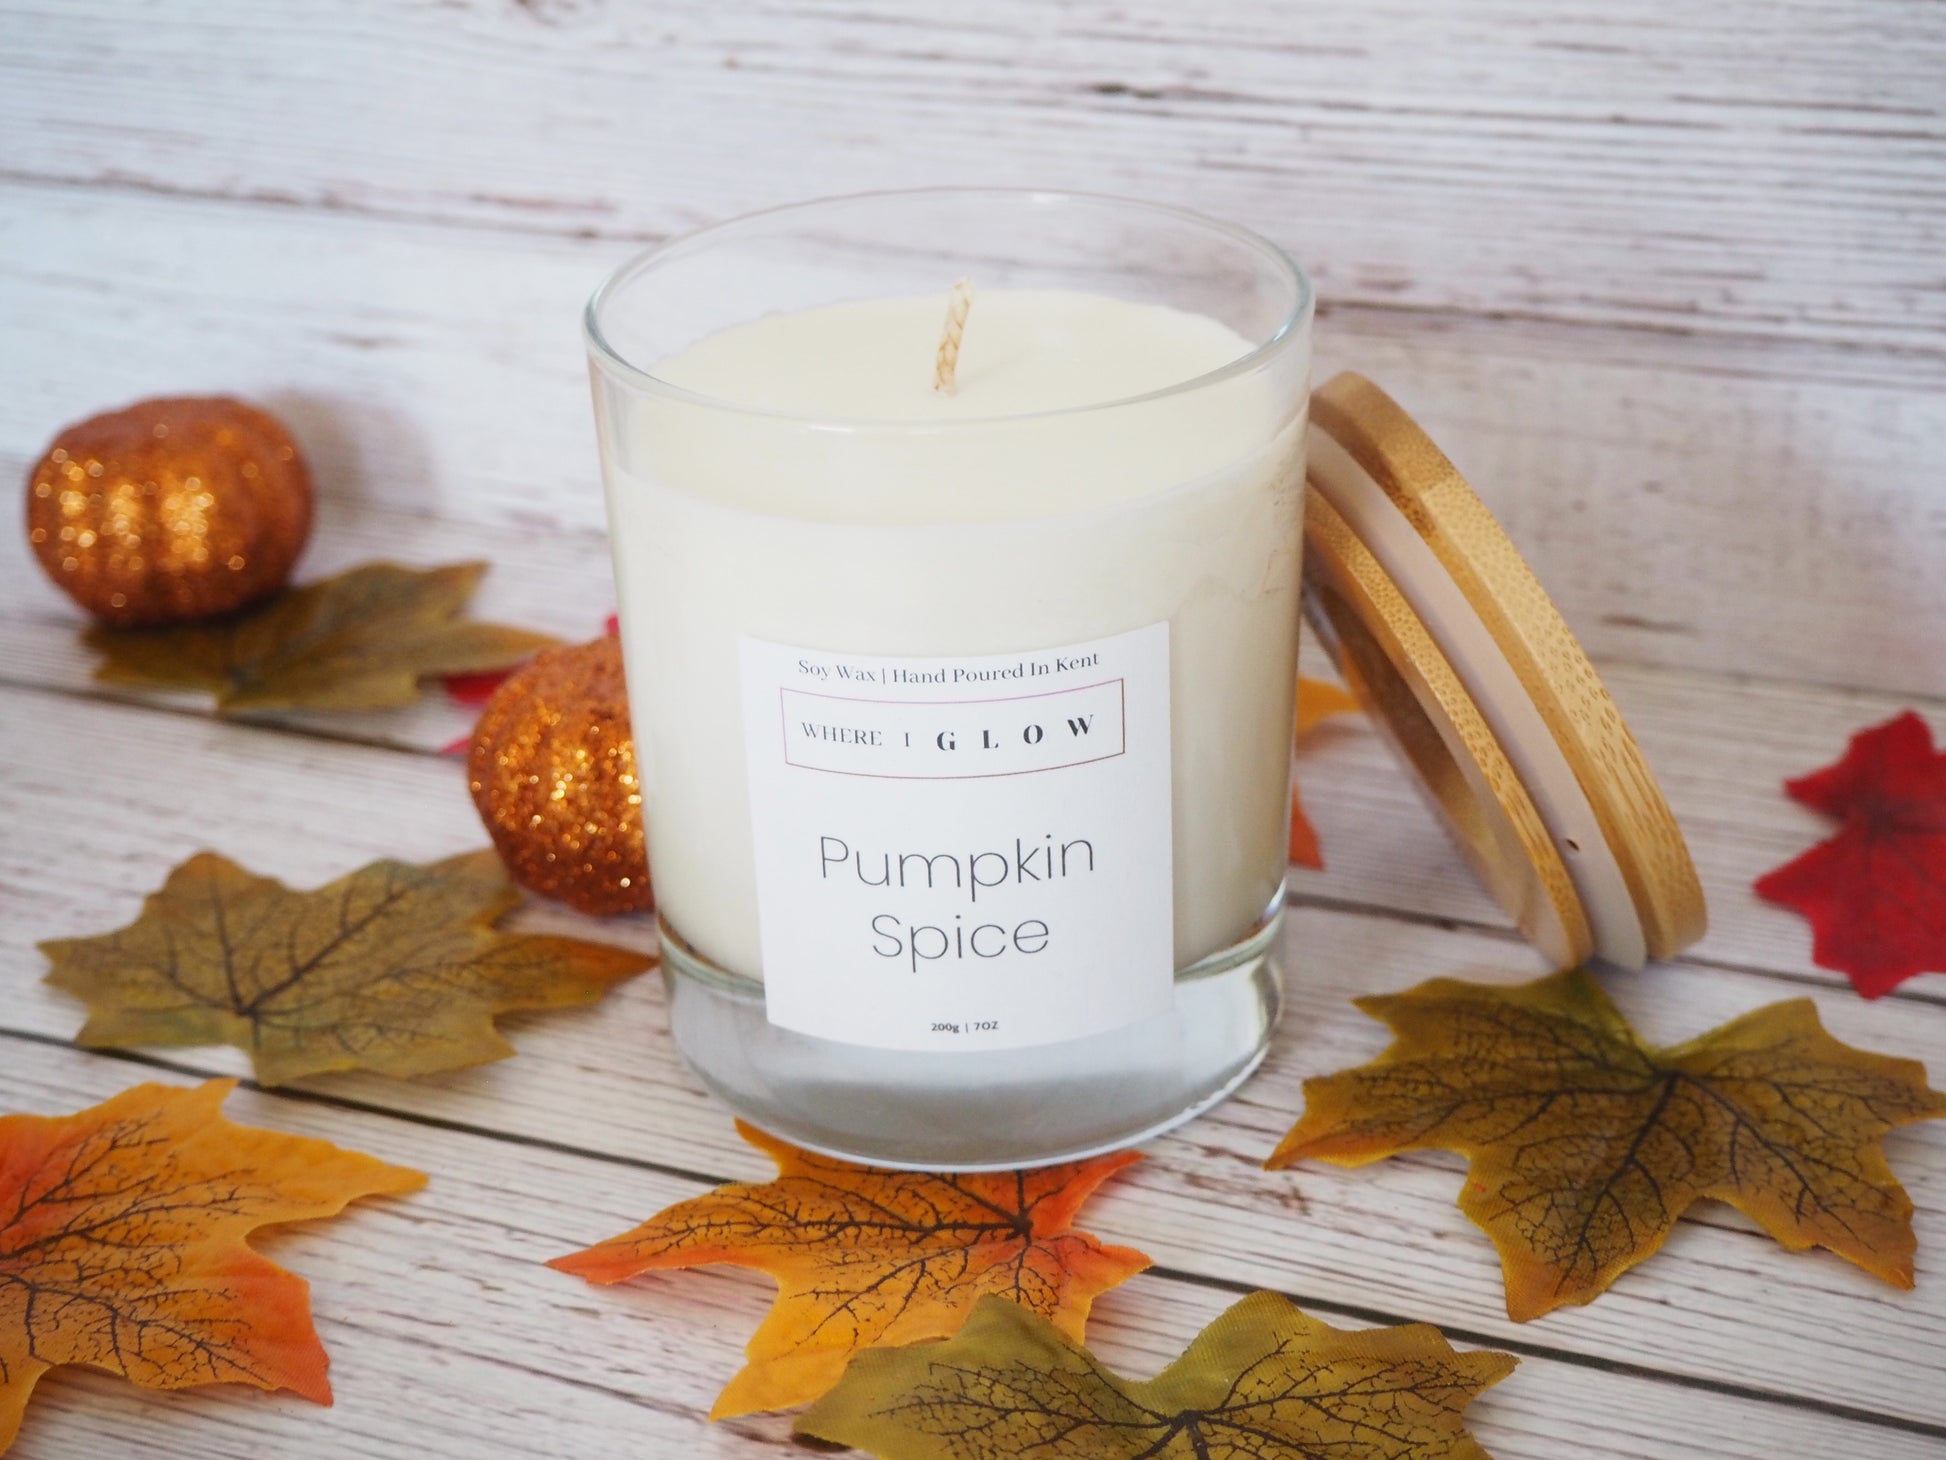 Pumpkin Spice Spicy Soy Candle 7 oz by Where I Glow